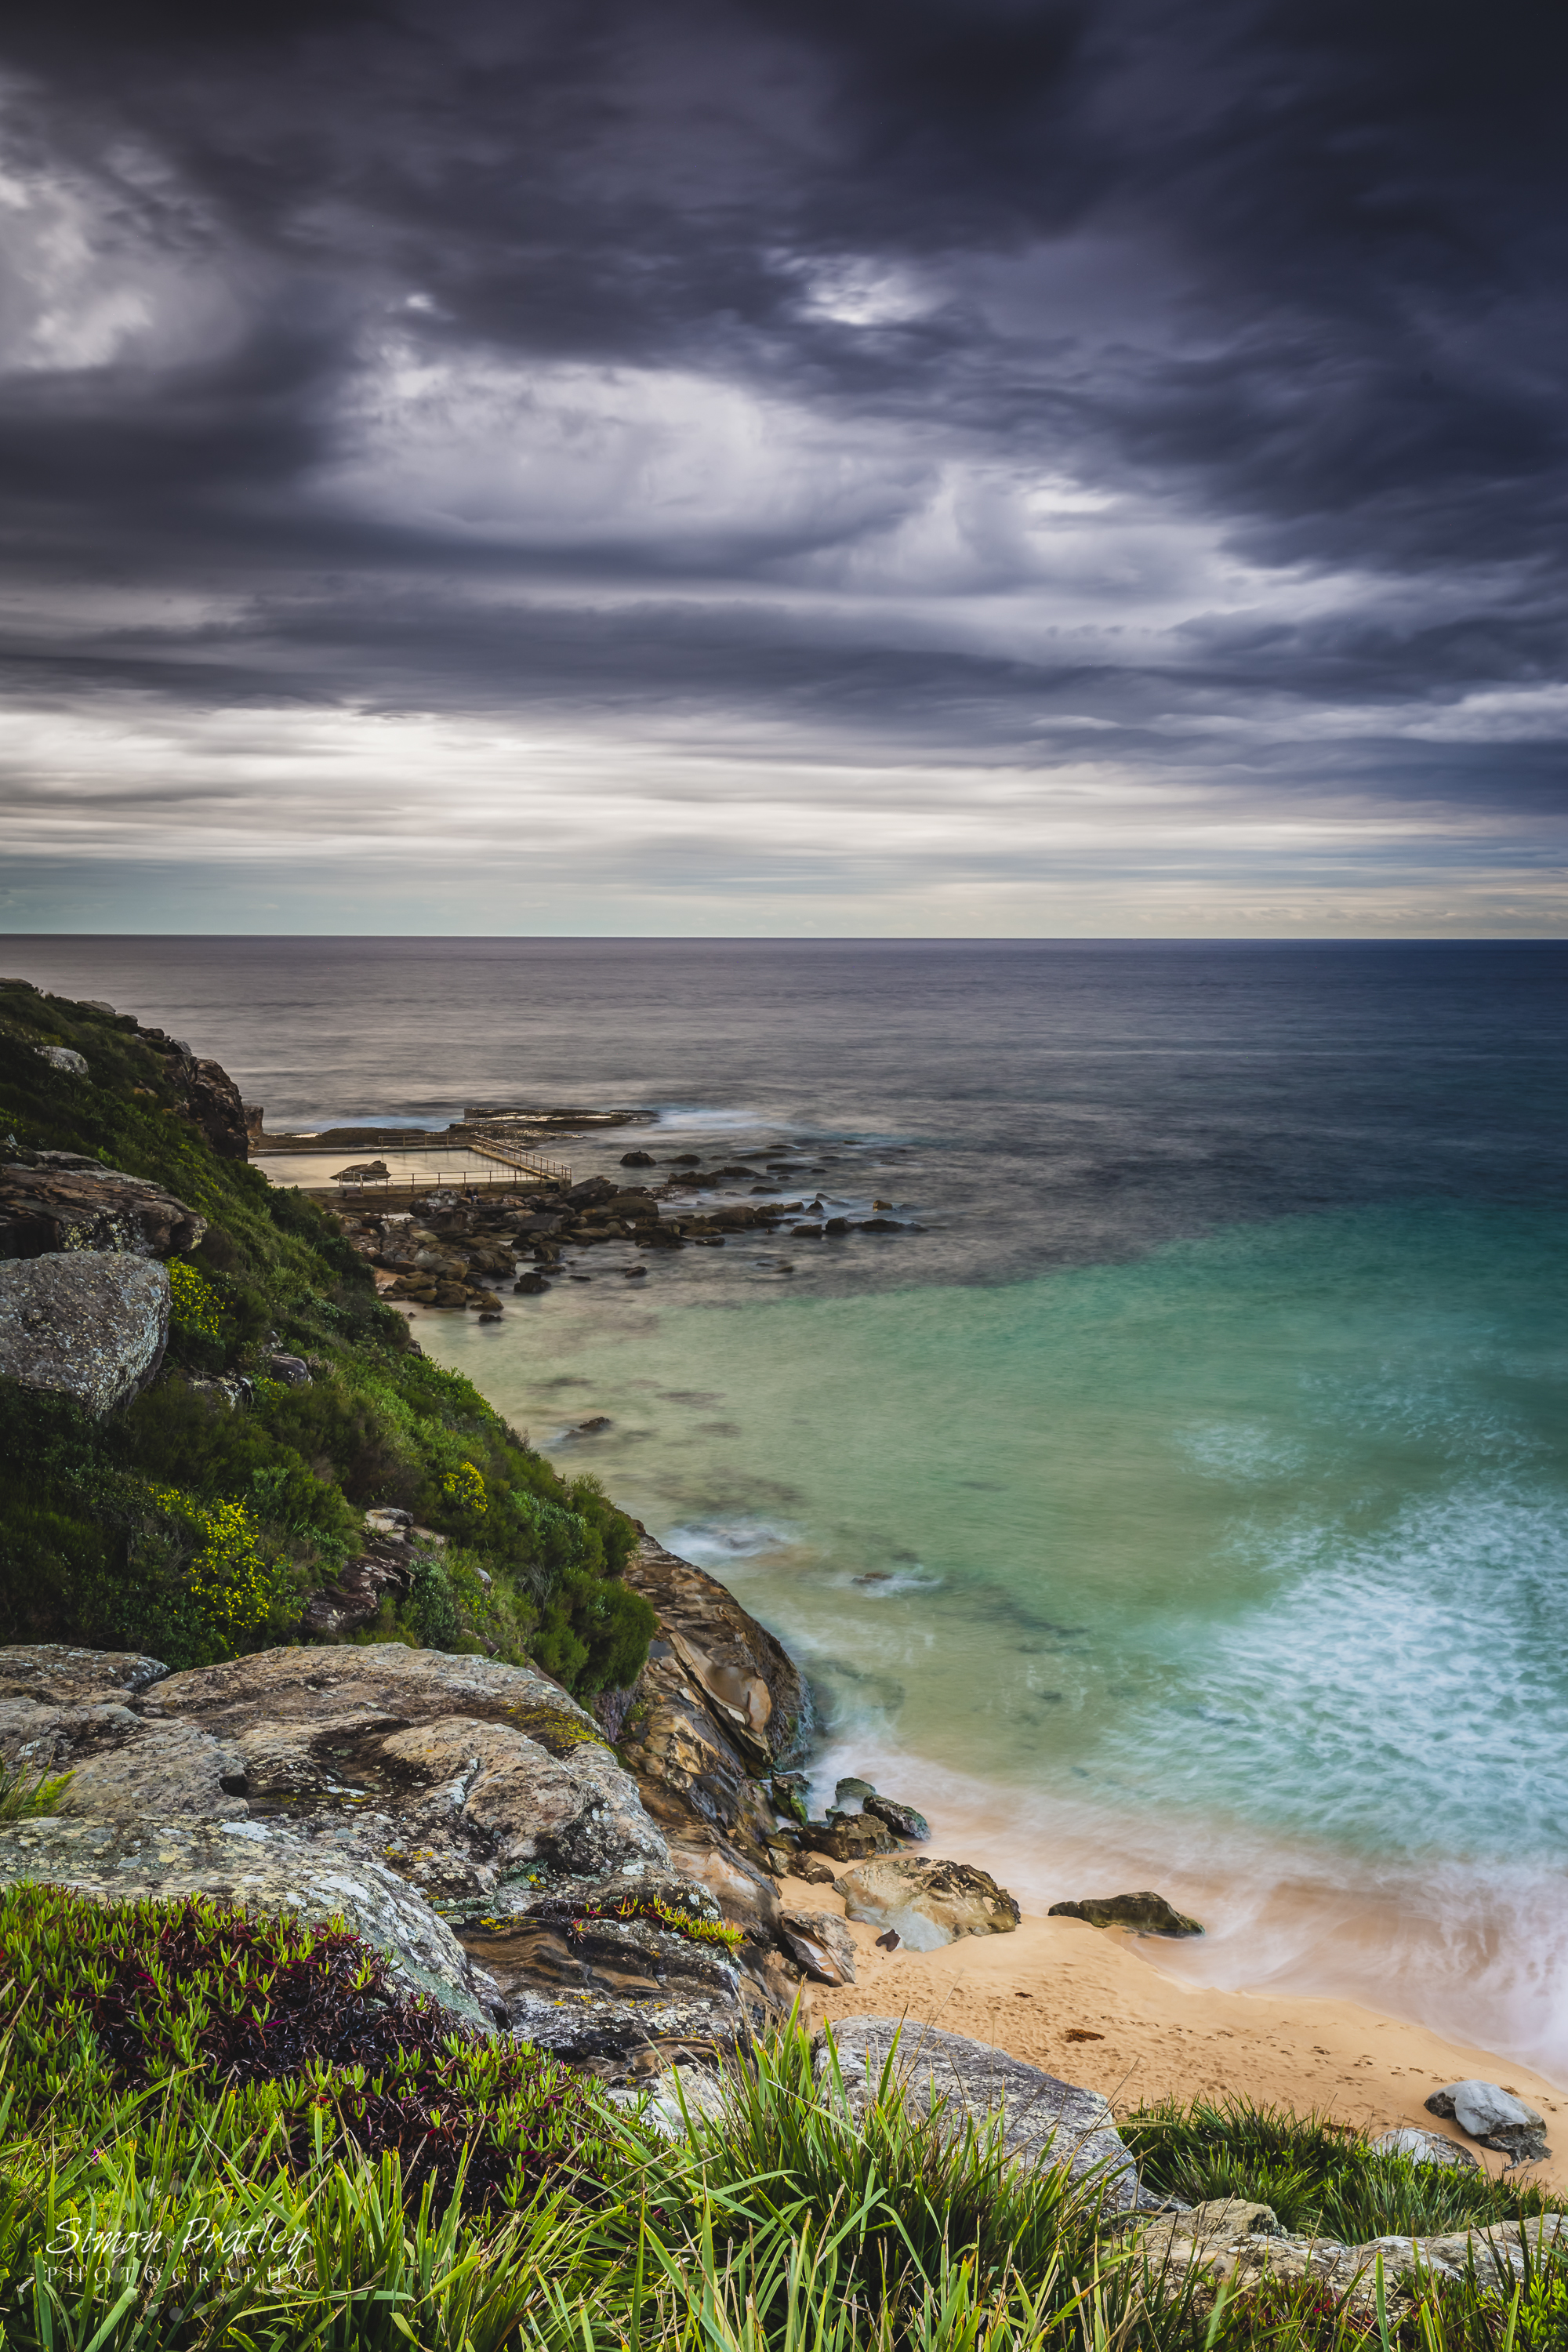 Heavy Skies at North Curl Curl2